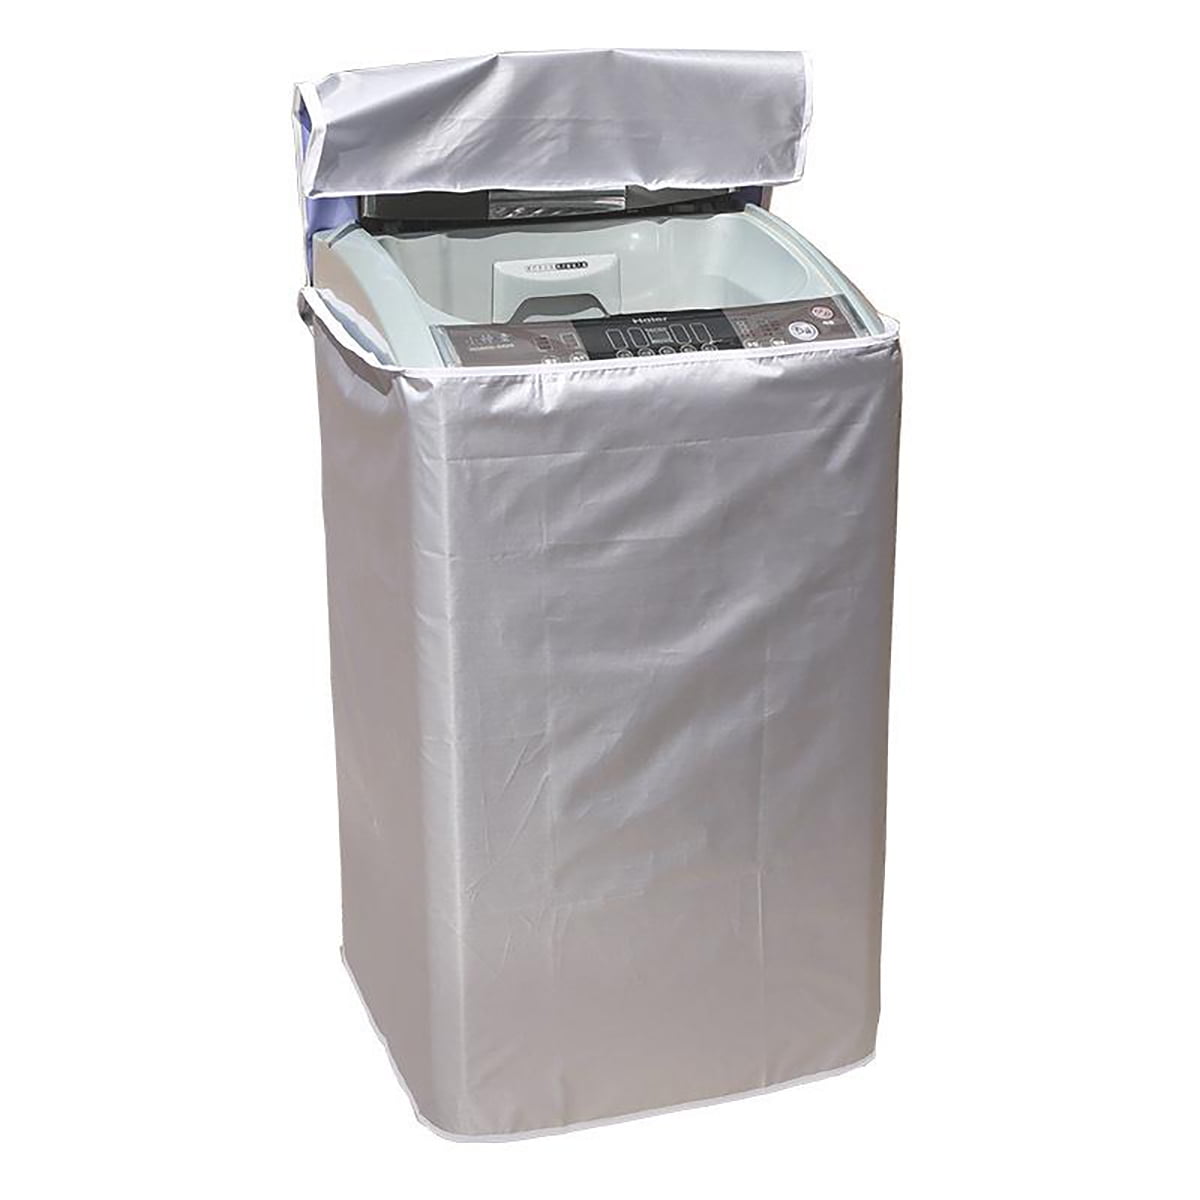 Transparent Washing machine cover,Waterproof Washer/Dryer cover Sunscreen Dustproof Fit most top load or front load washers 